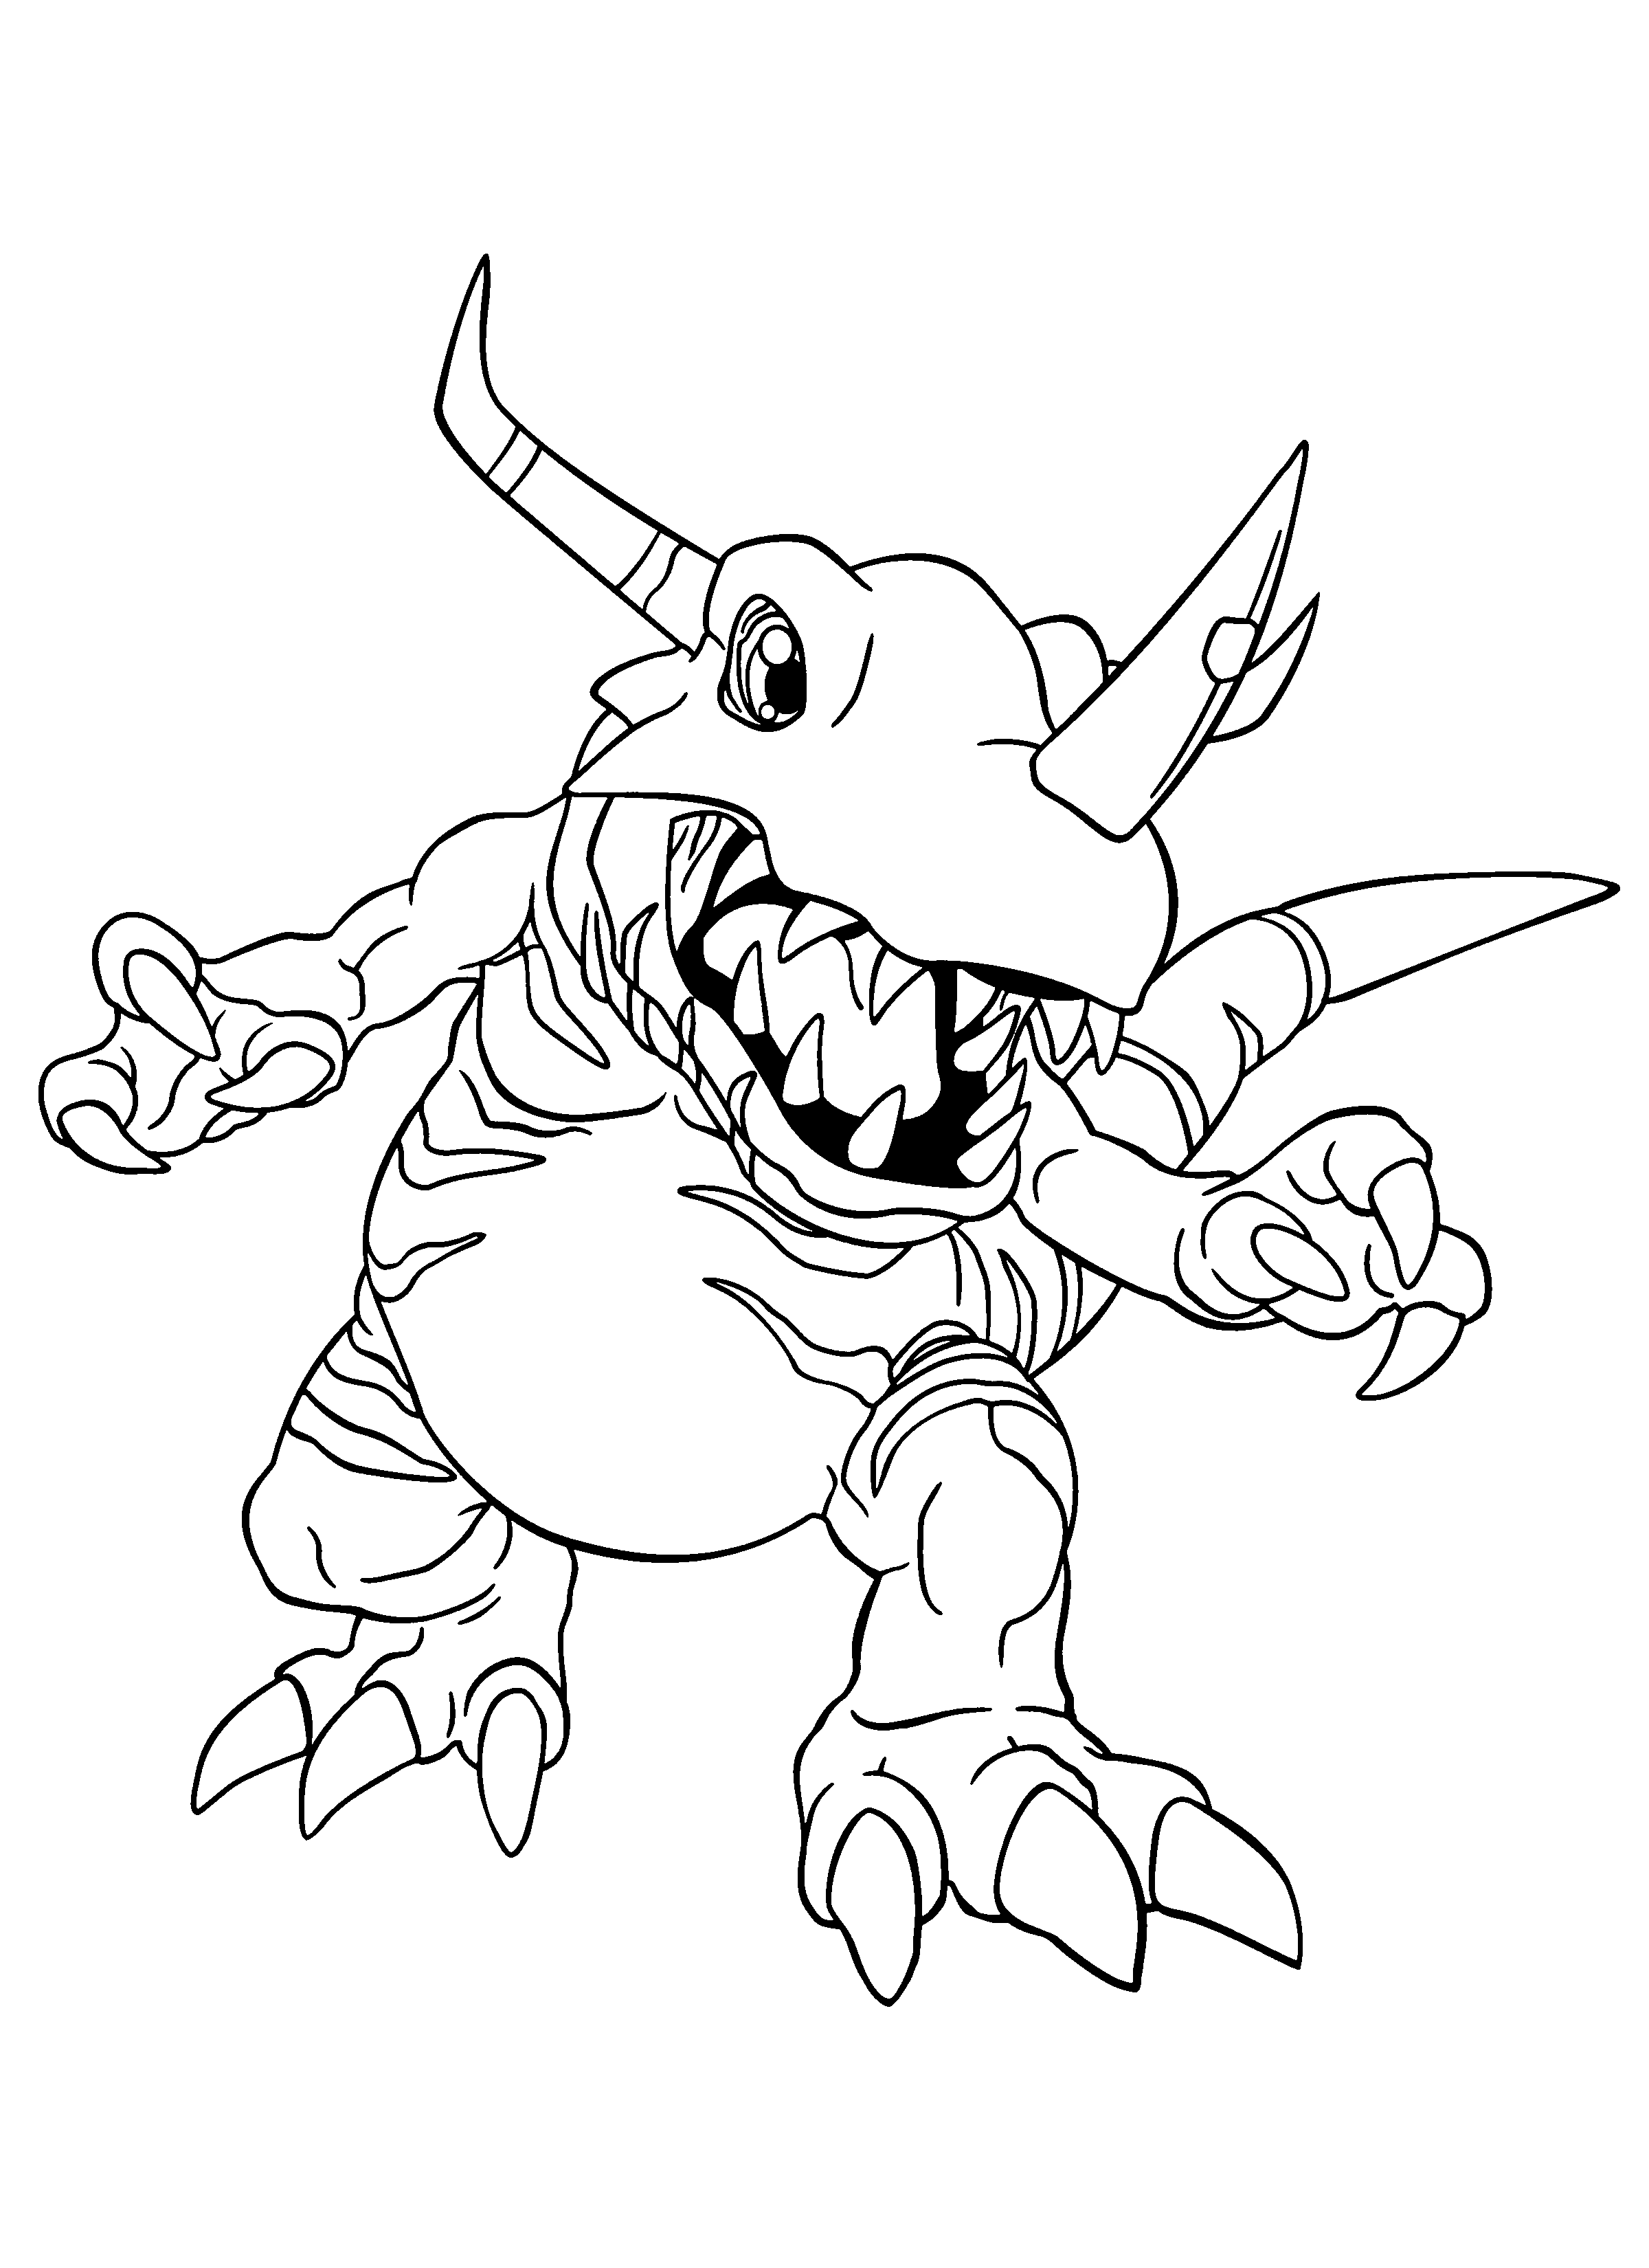 Drawing Digimon #51498 (Cartoons) – Printable coloring pages